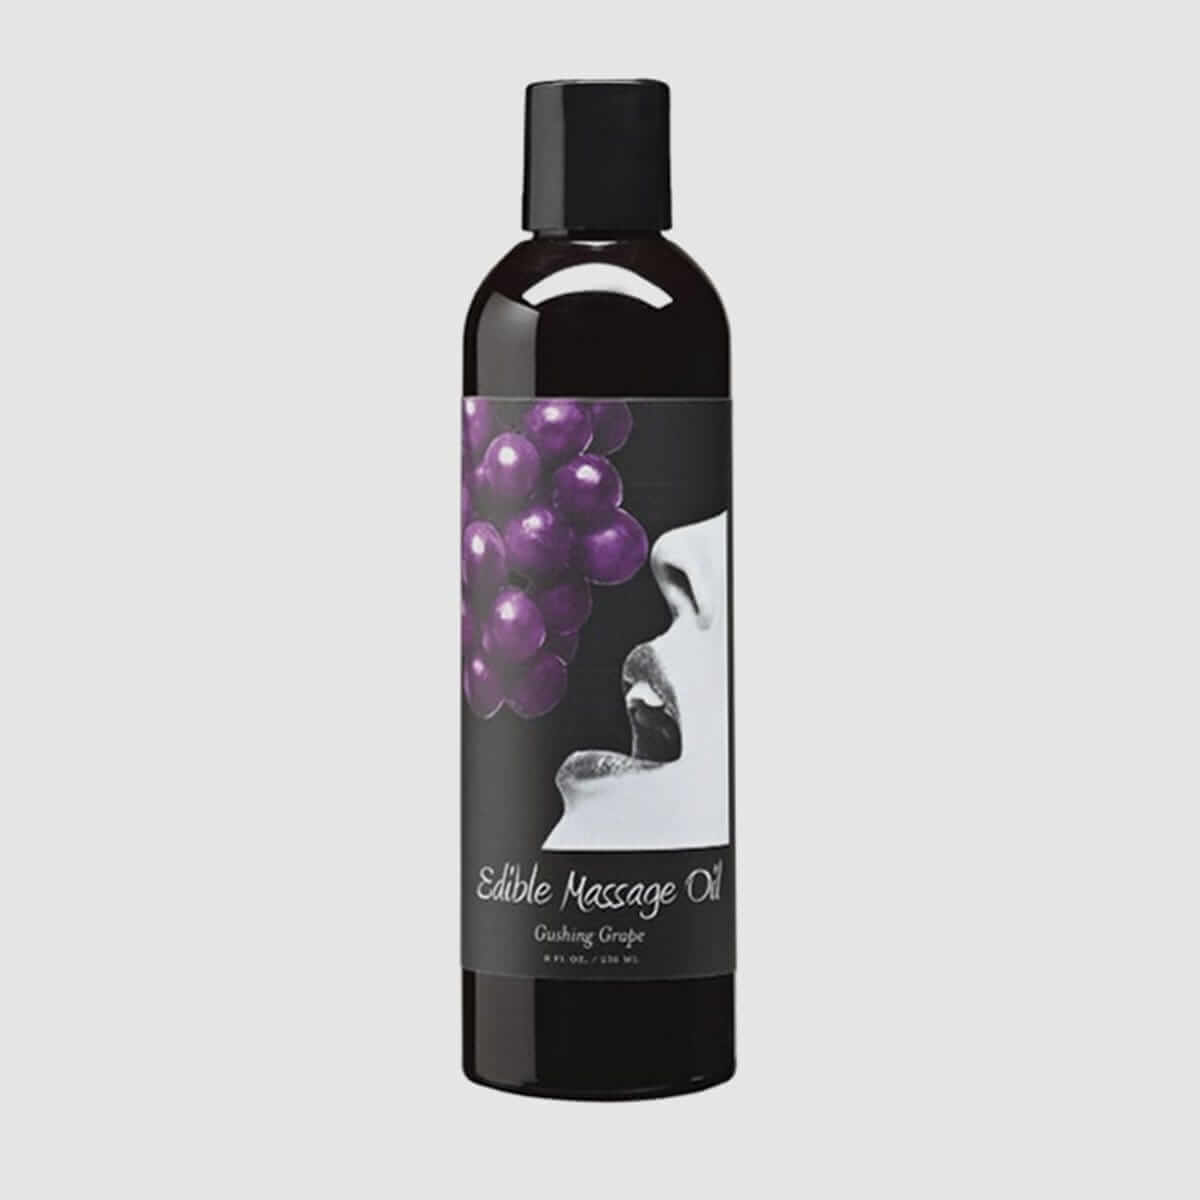 Earthly Body Edible Massage Oil - Grape, 8oz/236ml - Thorn & Feather Sex Toy Canada